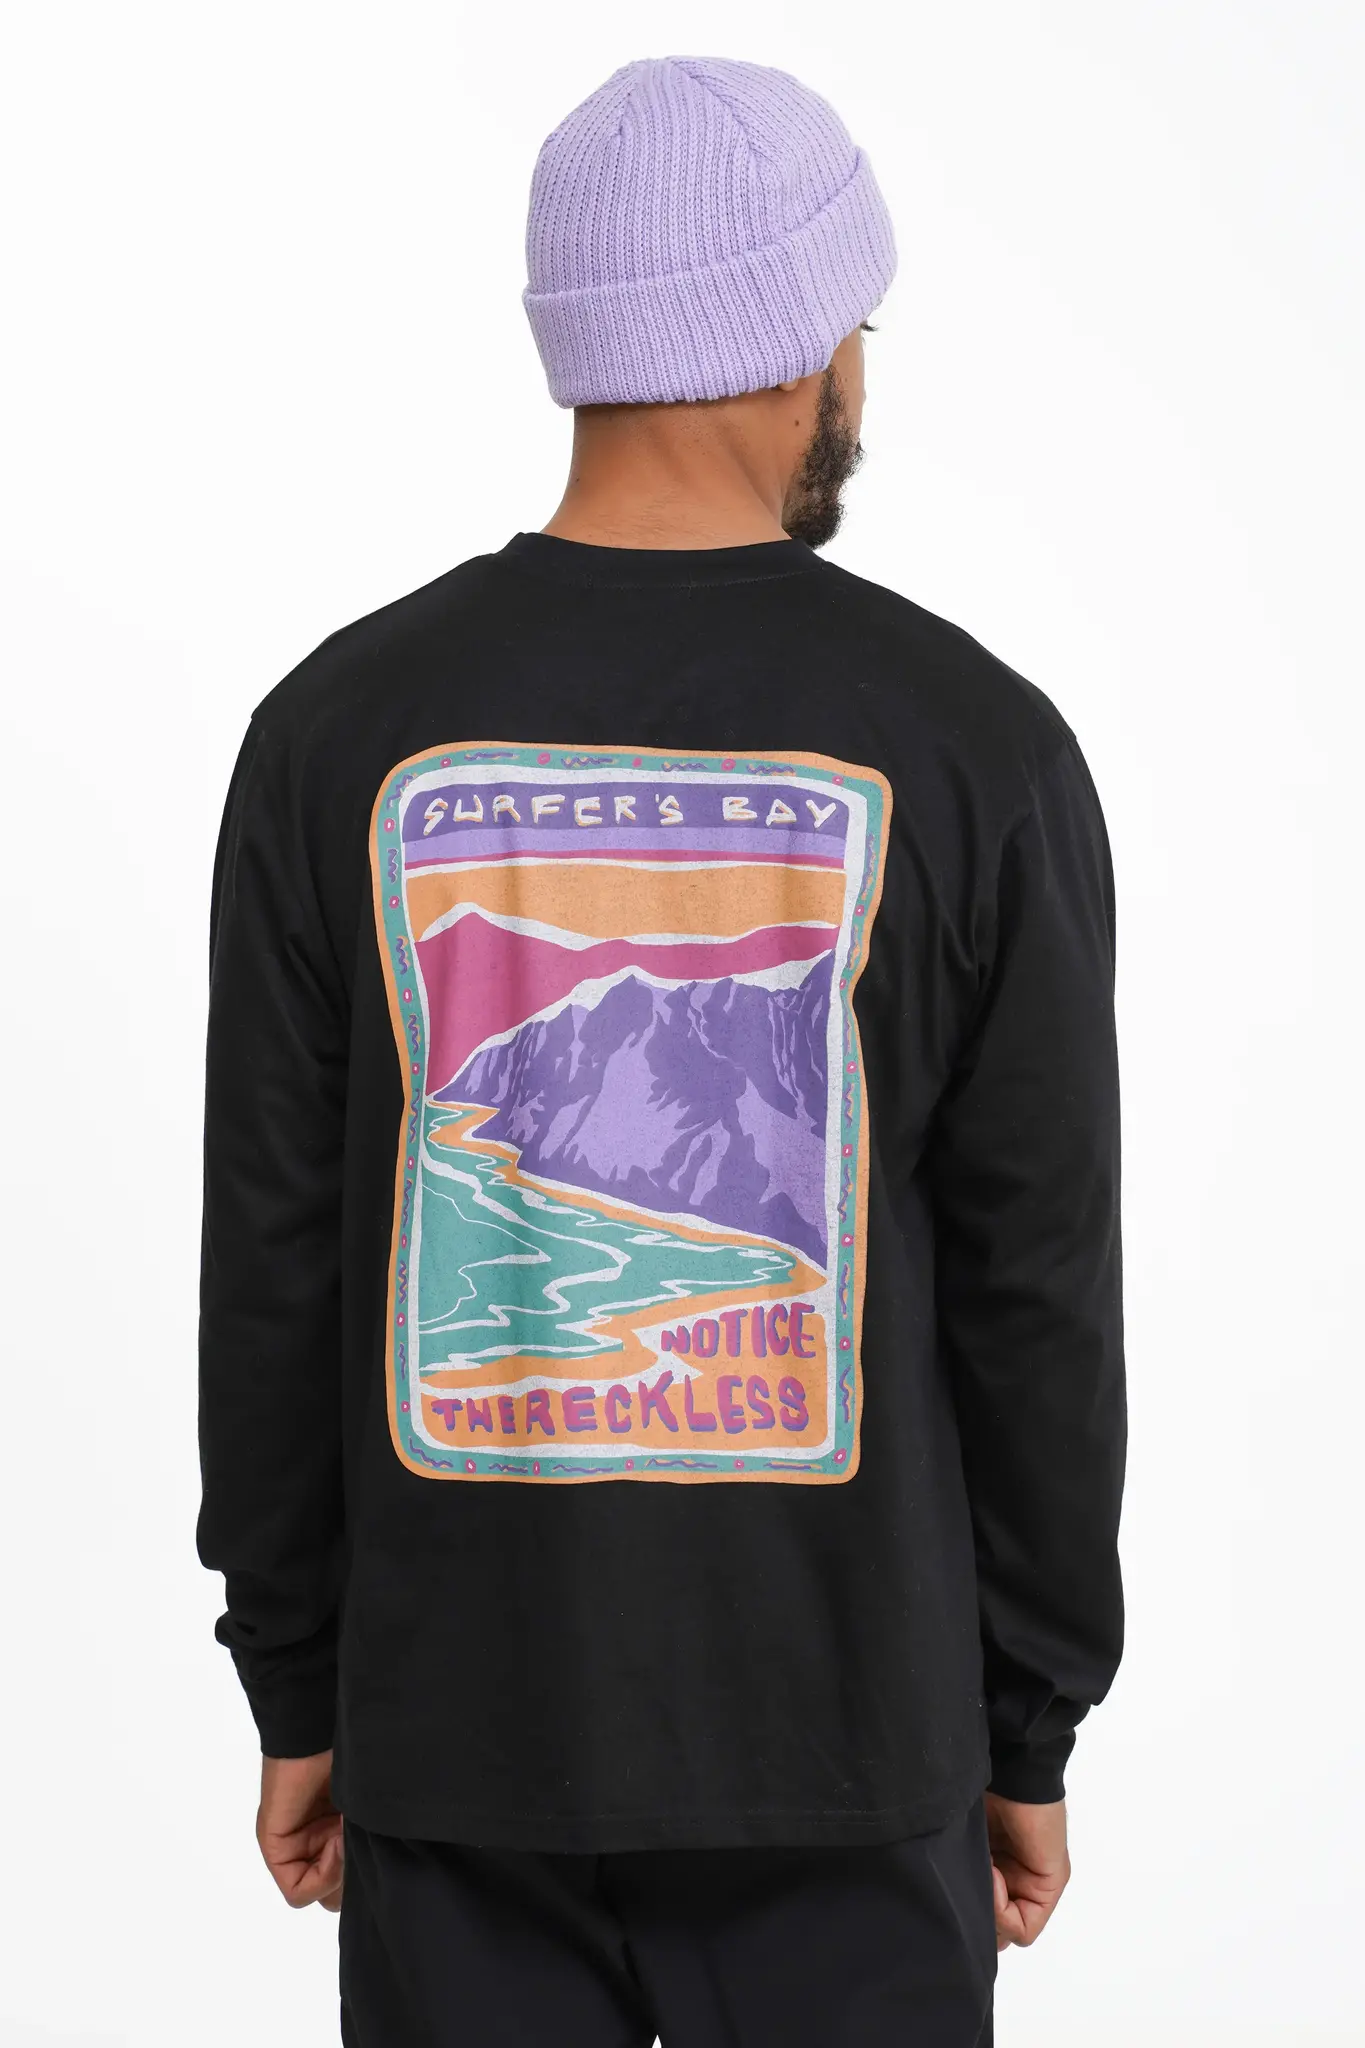 Notice The Reckless. Notice the Reckless Surfer's Bay Longsleeve Tee